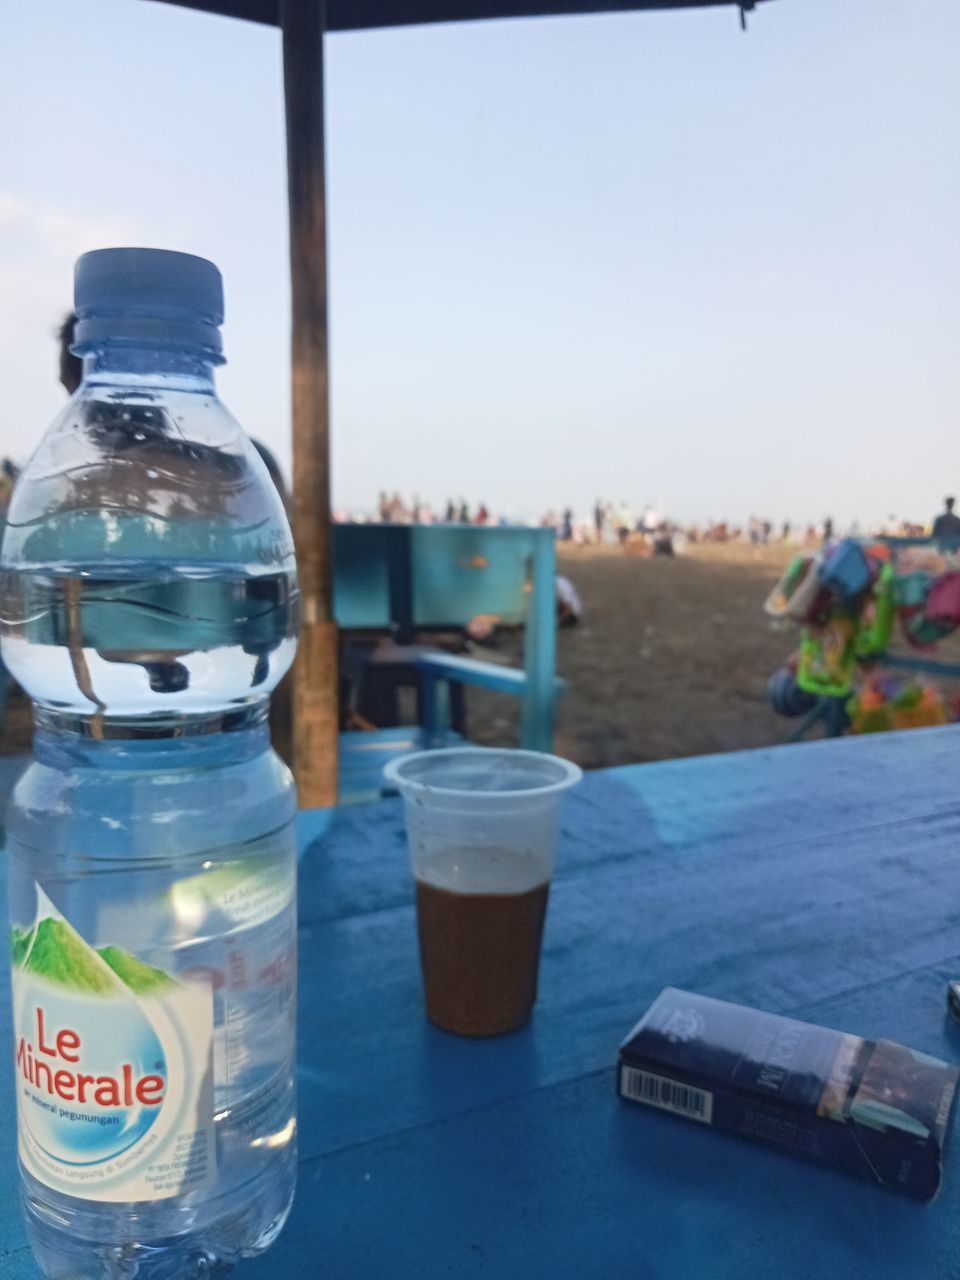 water, blue, container, bottle, bottled water, mineral water, nature, food and drink, drinking water, drink, day, table, sky, focus on foreground, water bottle, outdoors, glass, refreshment, no people, sea, business, plastic bottle, environment